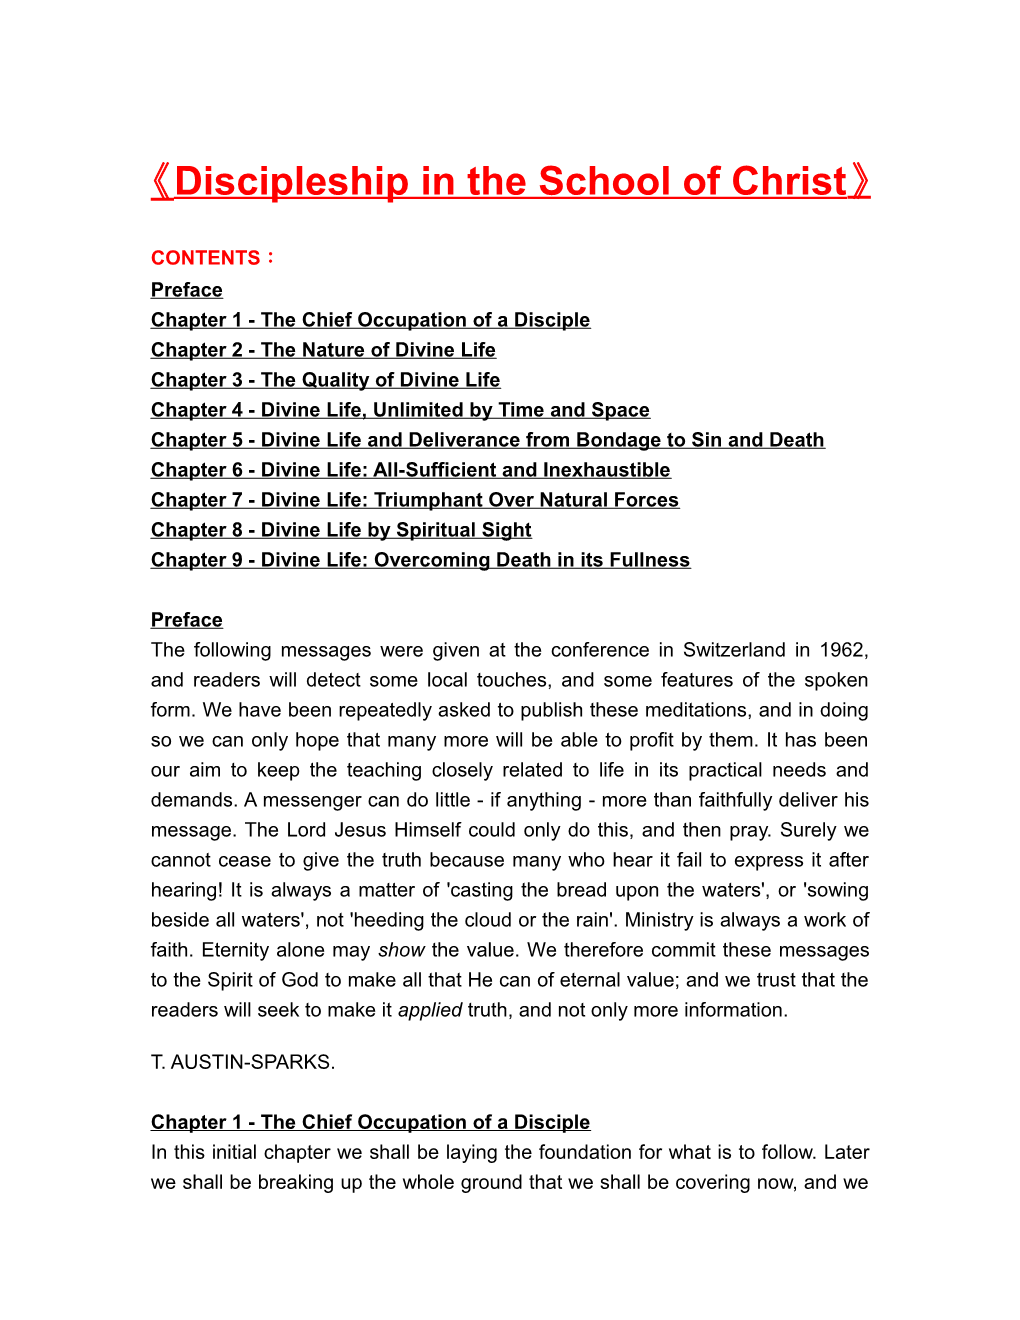 Discipleship in the School of Christ